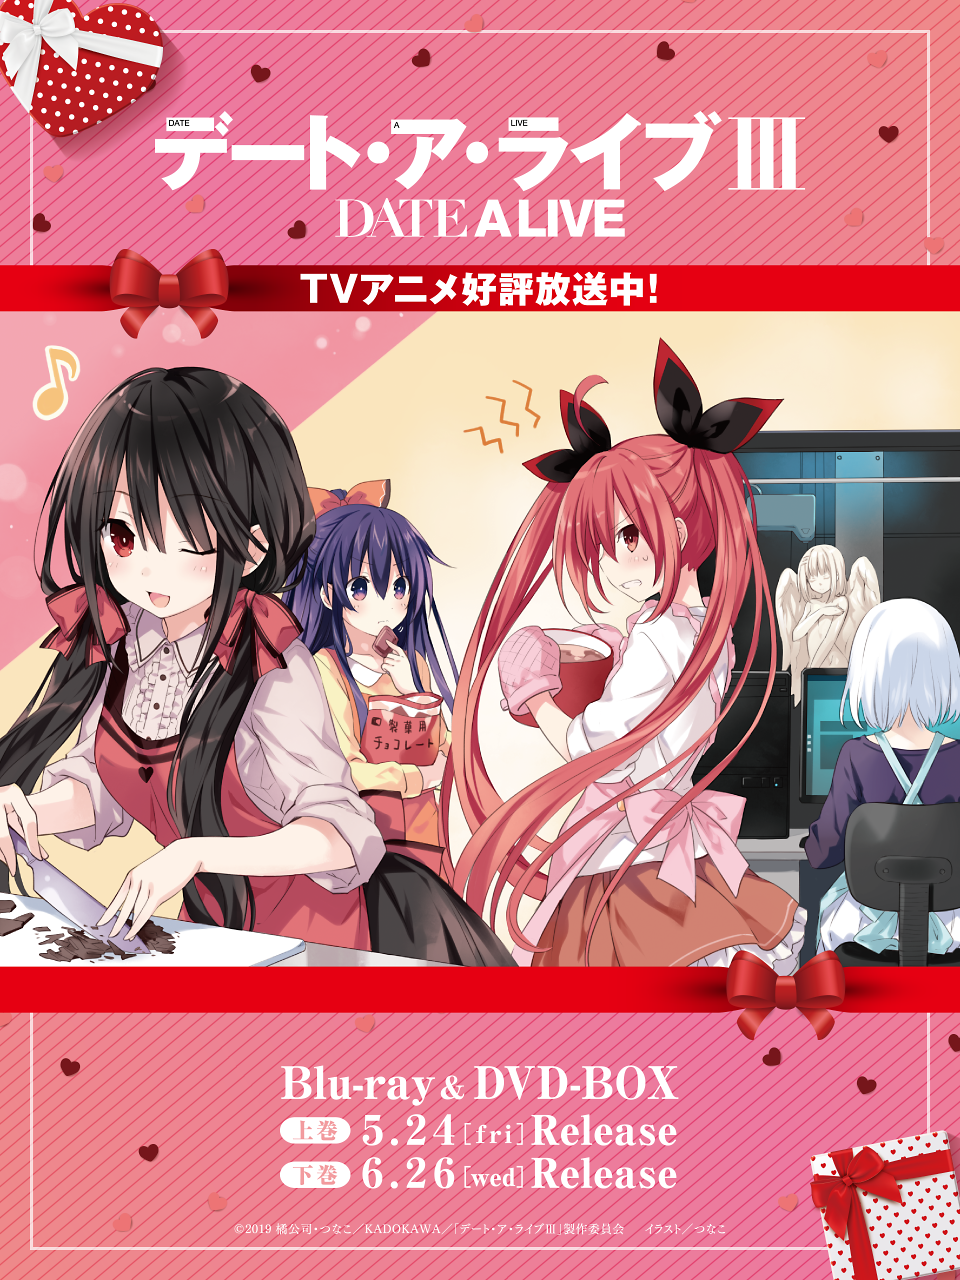 Special デート ア ライブ Date A Live アニメ公式サイト